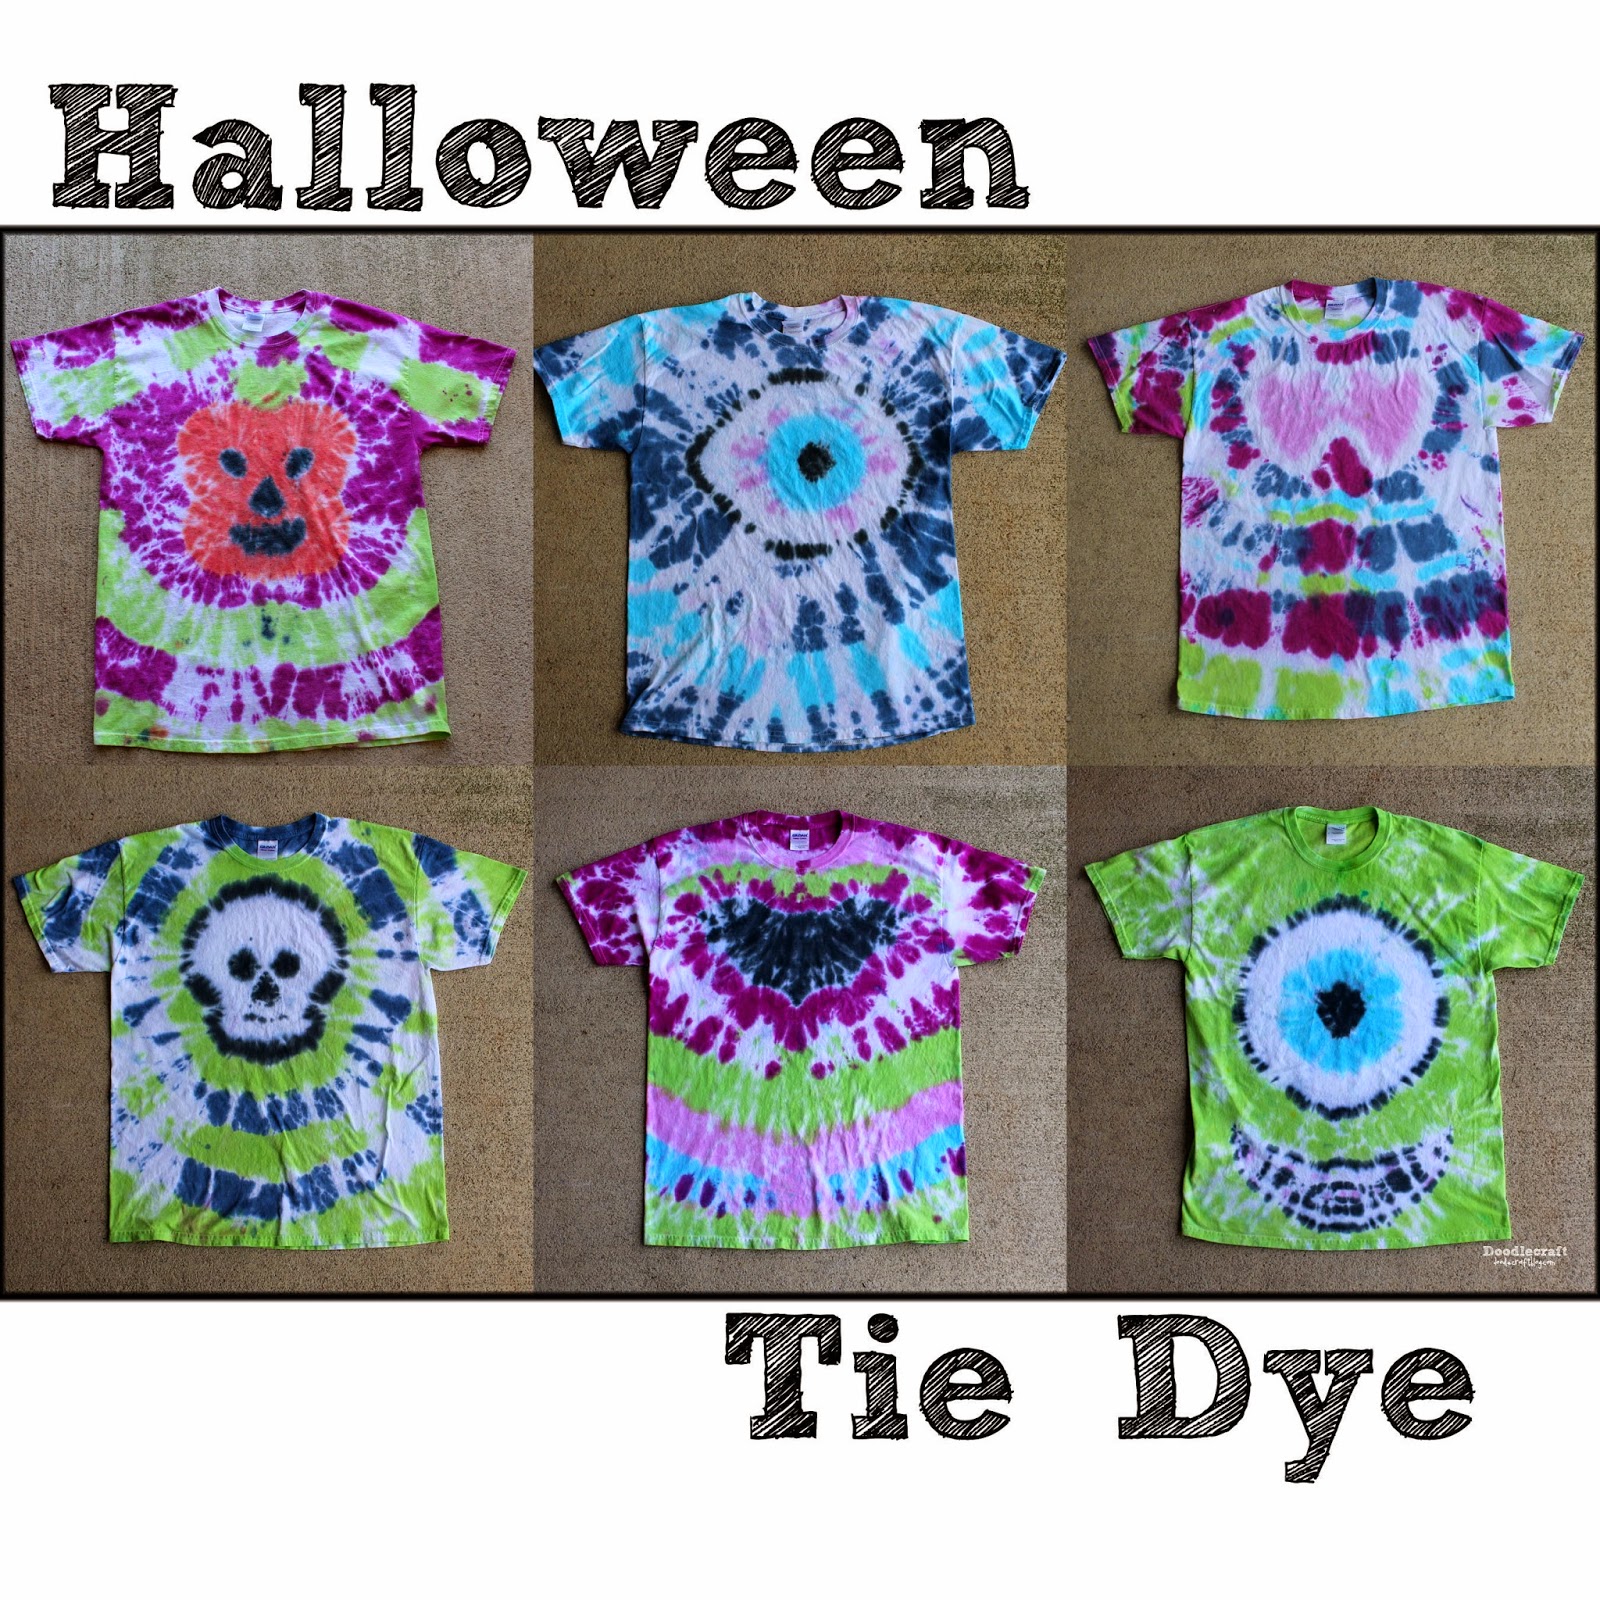 The Easiest Tie Dye Patterns for Kids: How to Tie Dye Shirts